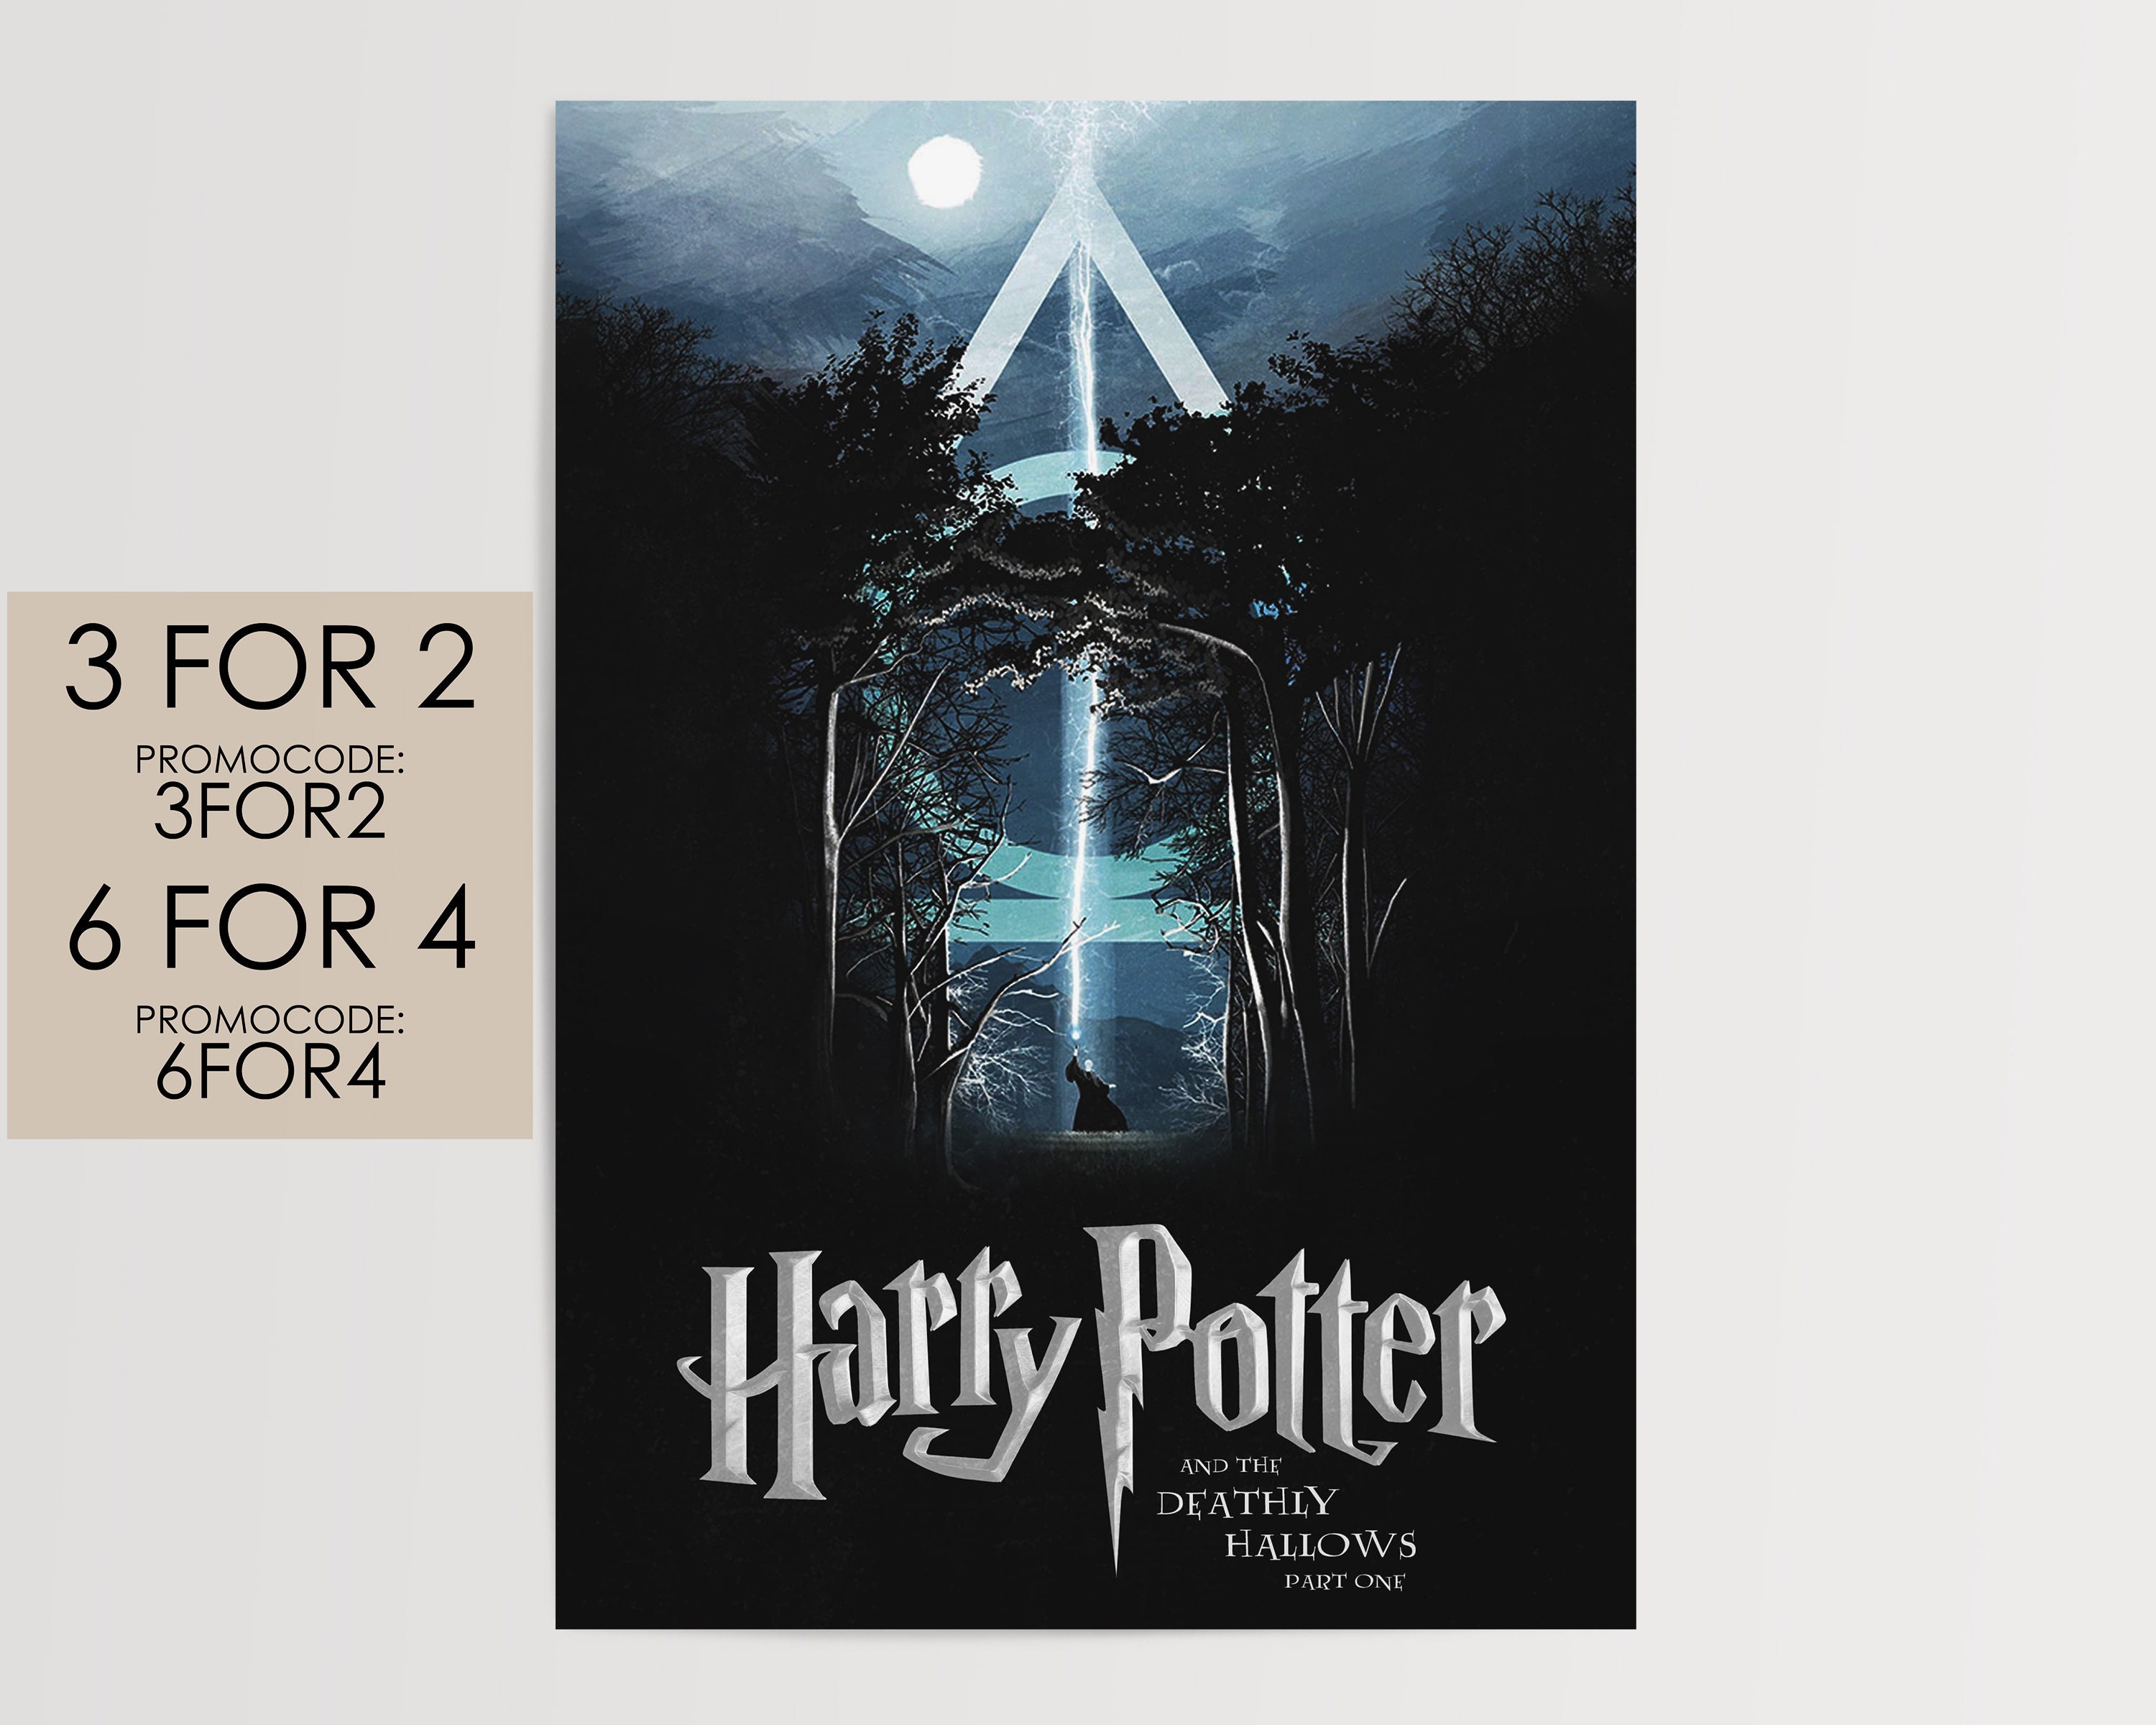 HARRY POTTER 7 DEATHLY HALLOWS PART 2 POSTER PICTURE PRINT Sizes A5 to A0  **NEW*